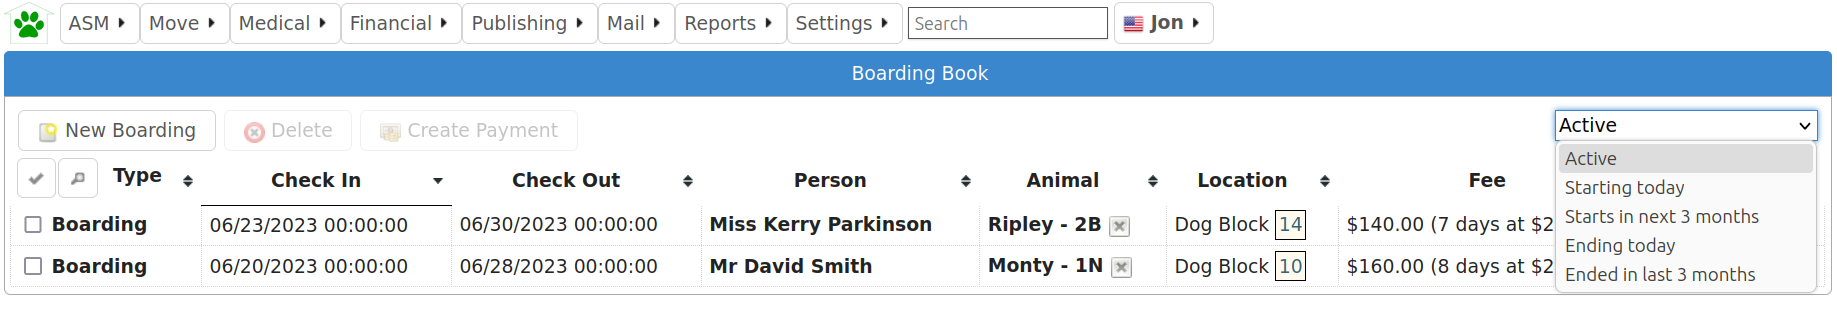 _images/boarding_book.png